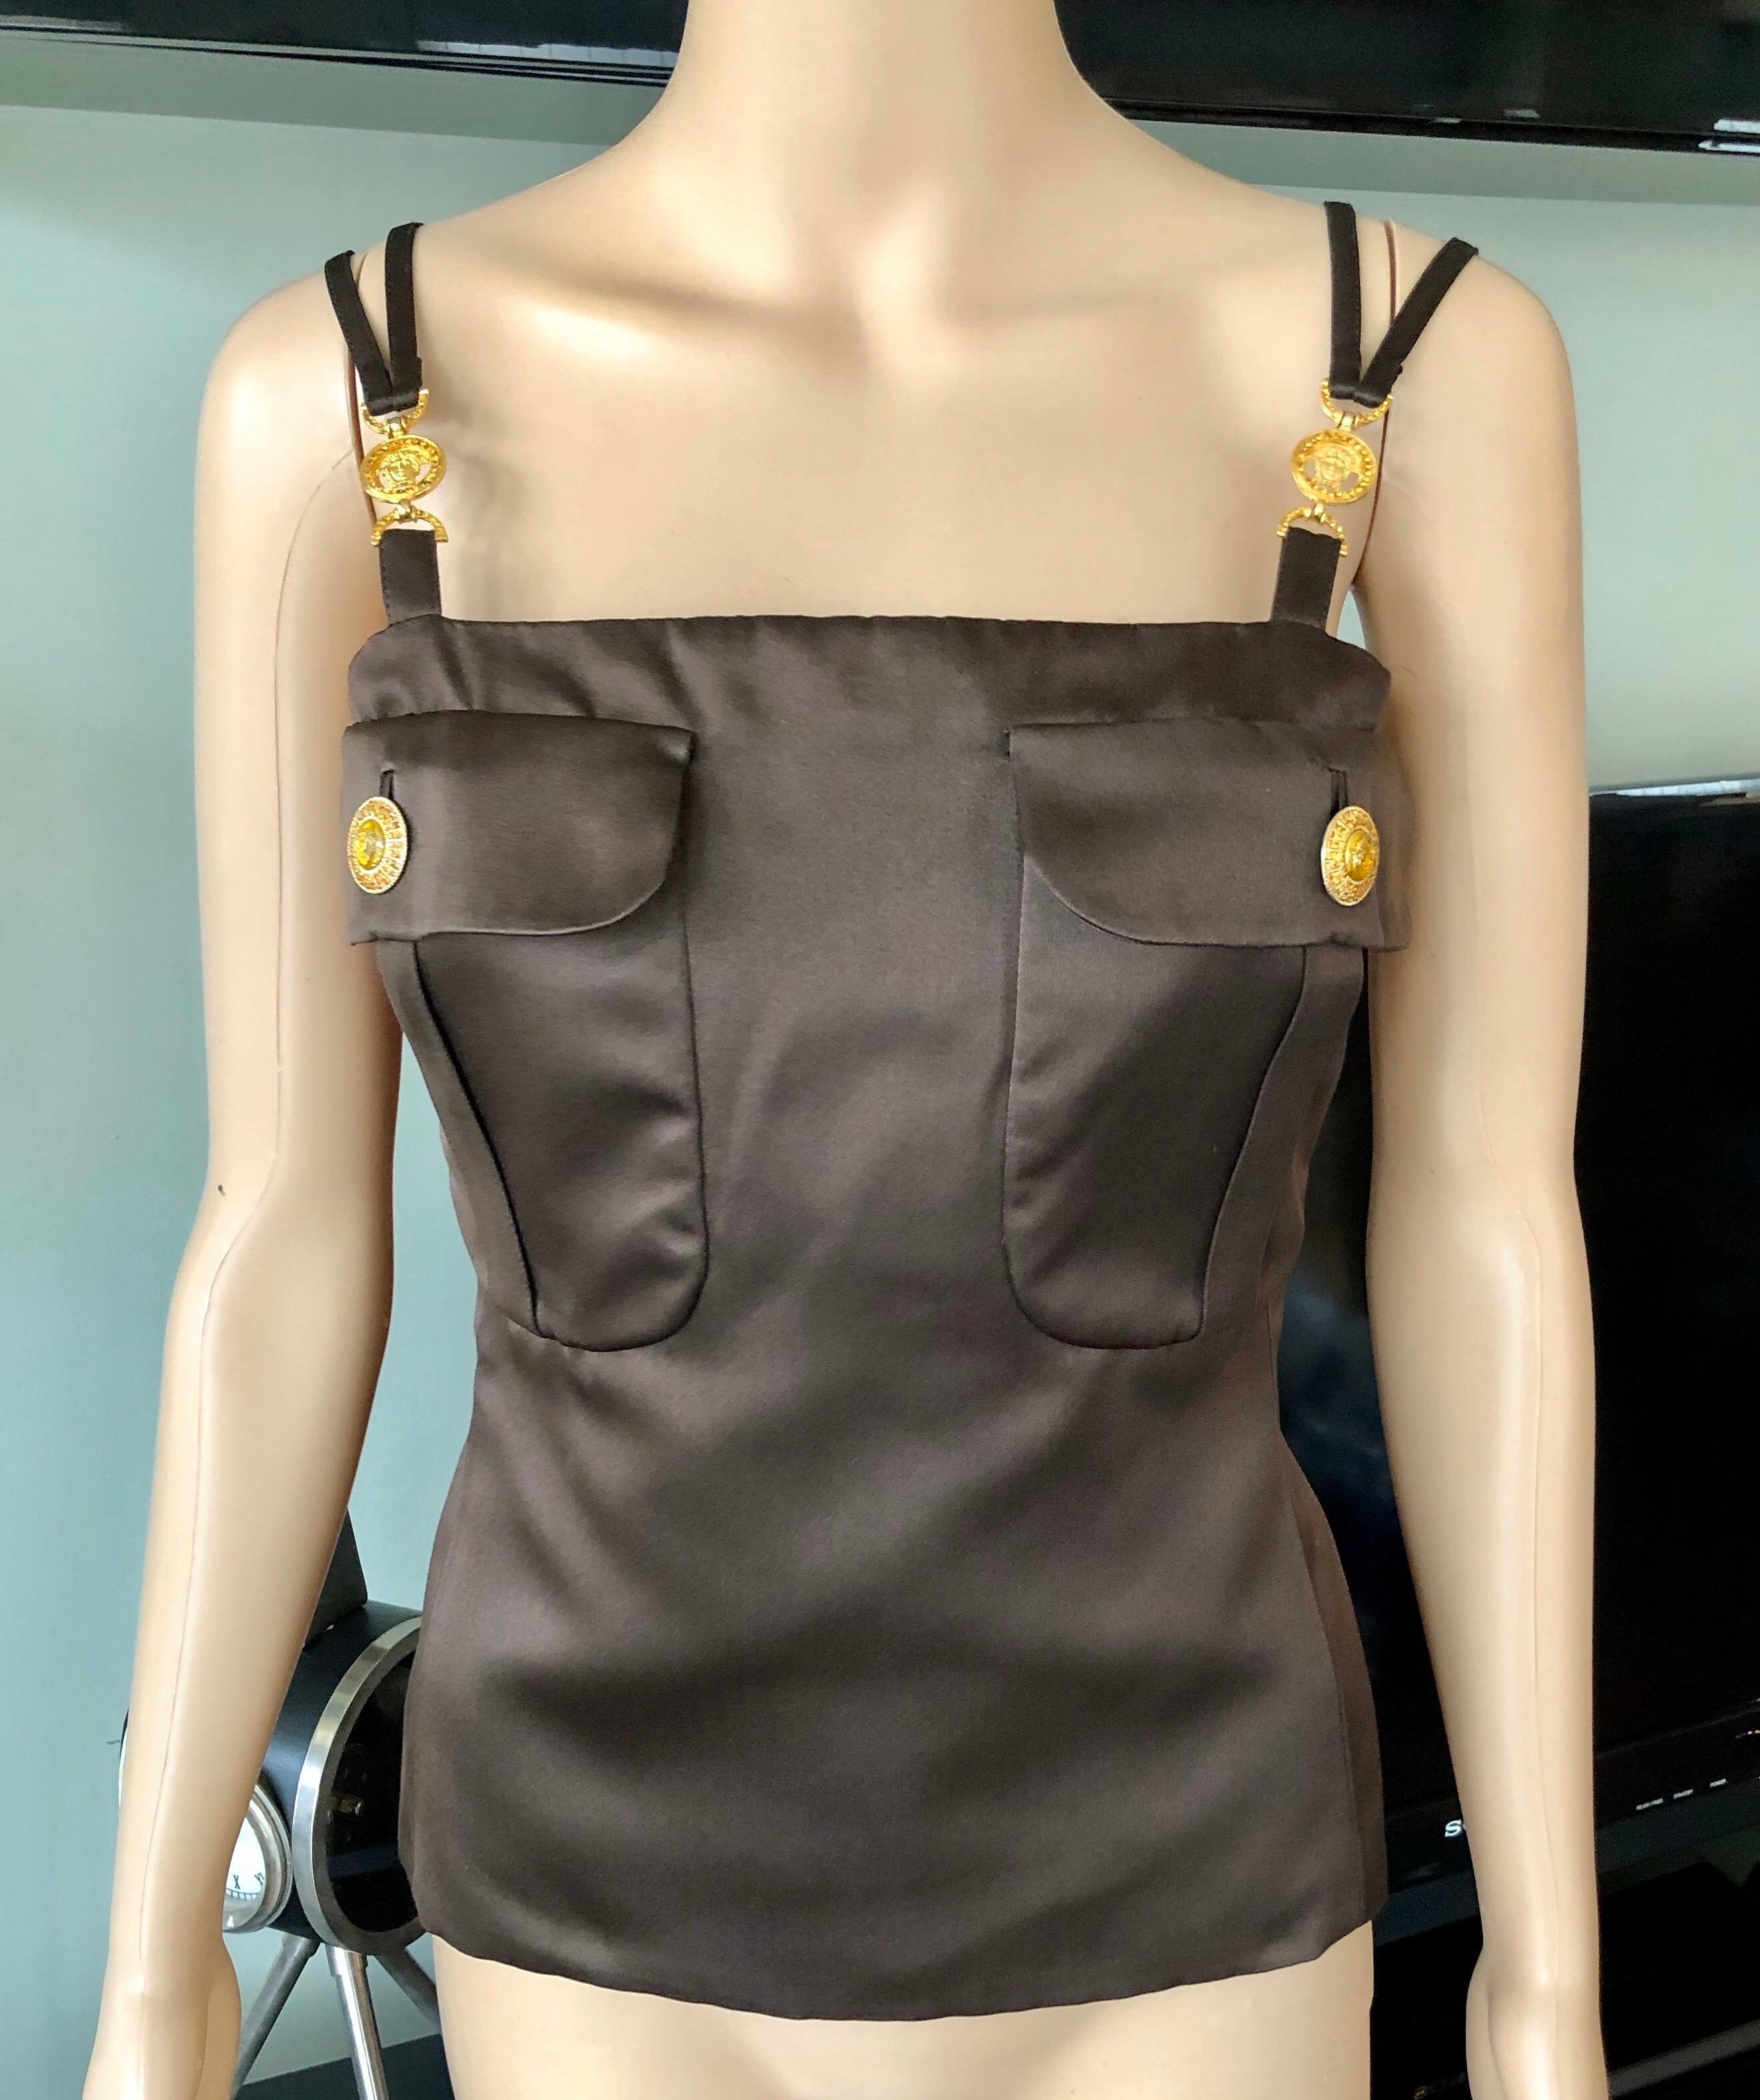 Gianni Versace F/W 1996 Runway Vintage Silk Brown Top IT 42

Gianni Versace silk brown top featuring logo embellishments at straps and concealed zip closure at back.
